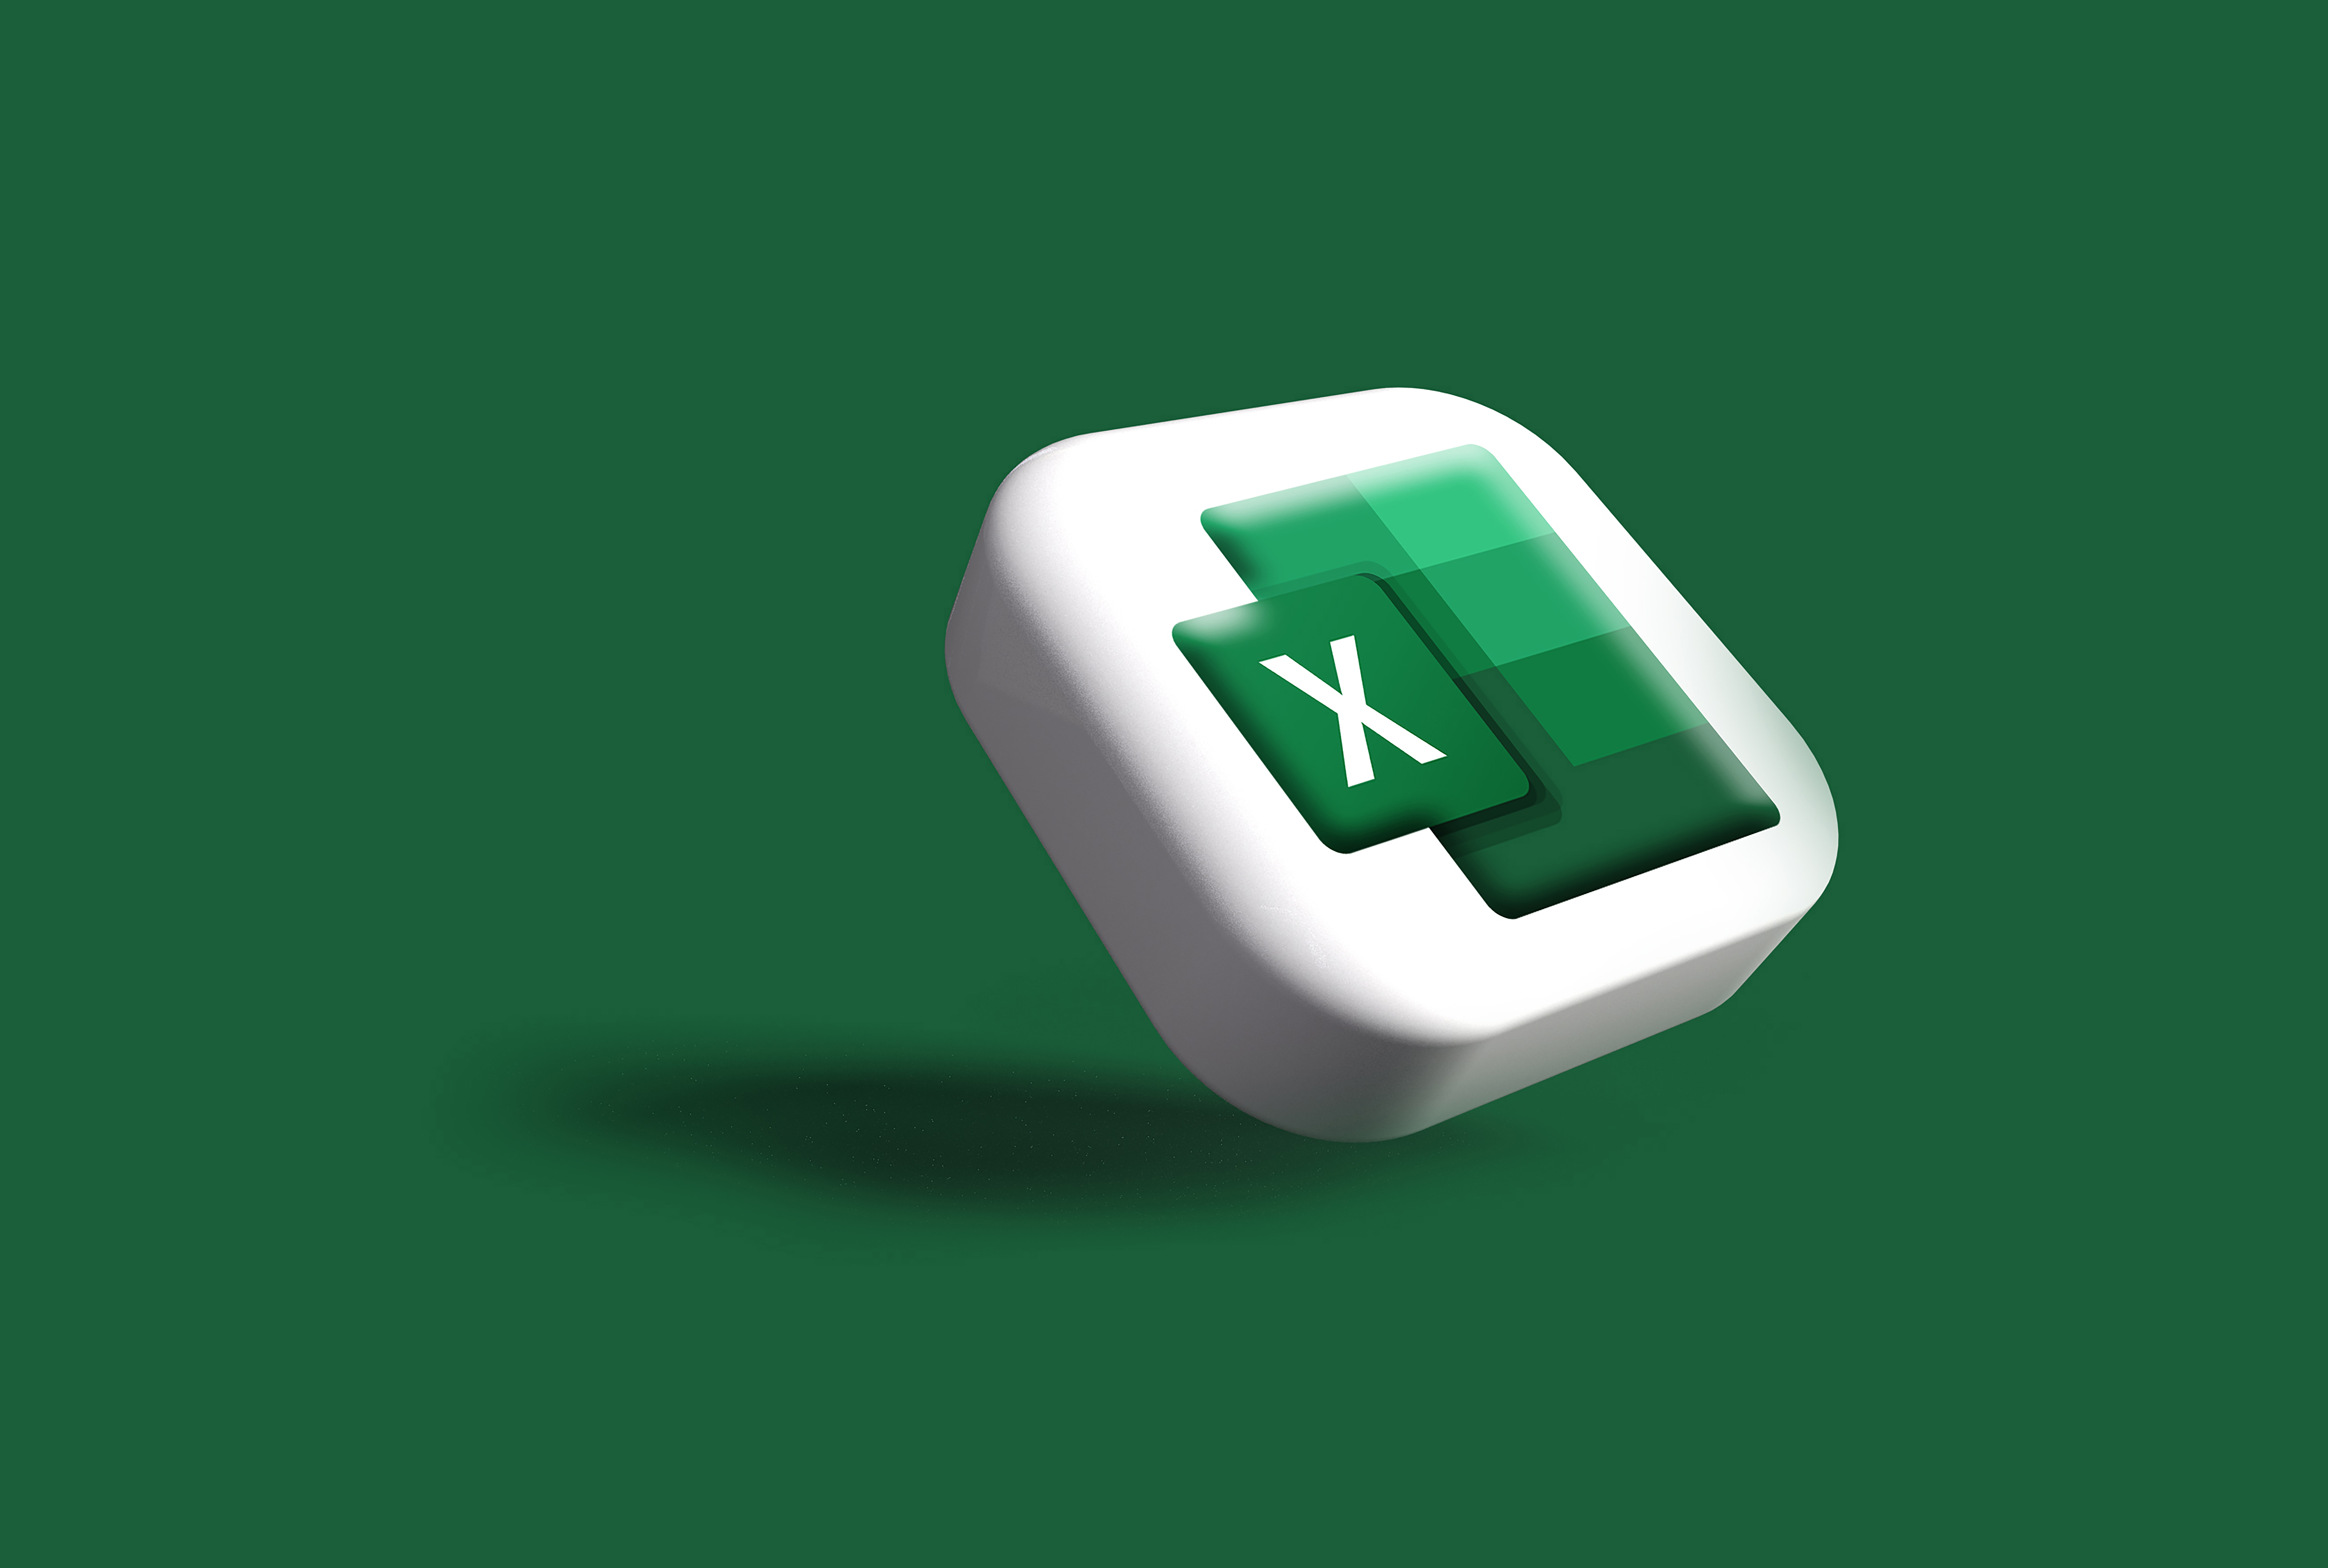 A 3D illustration of the Microsoft Excel logo, featuring a green square with a white "X" in the center, against a solid green background. The logo appears to be slightly tilted and floating, casting a subtle shadow beneath it. The image is clean and modern, emphasizing the Excel application in a visually appealing way.